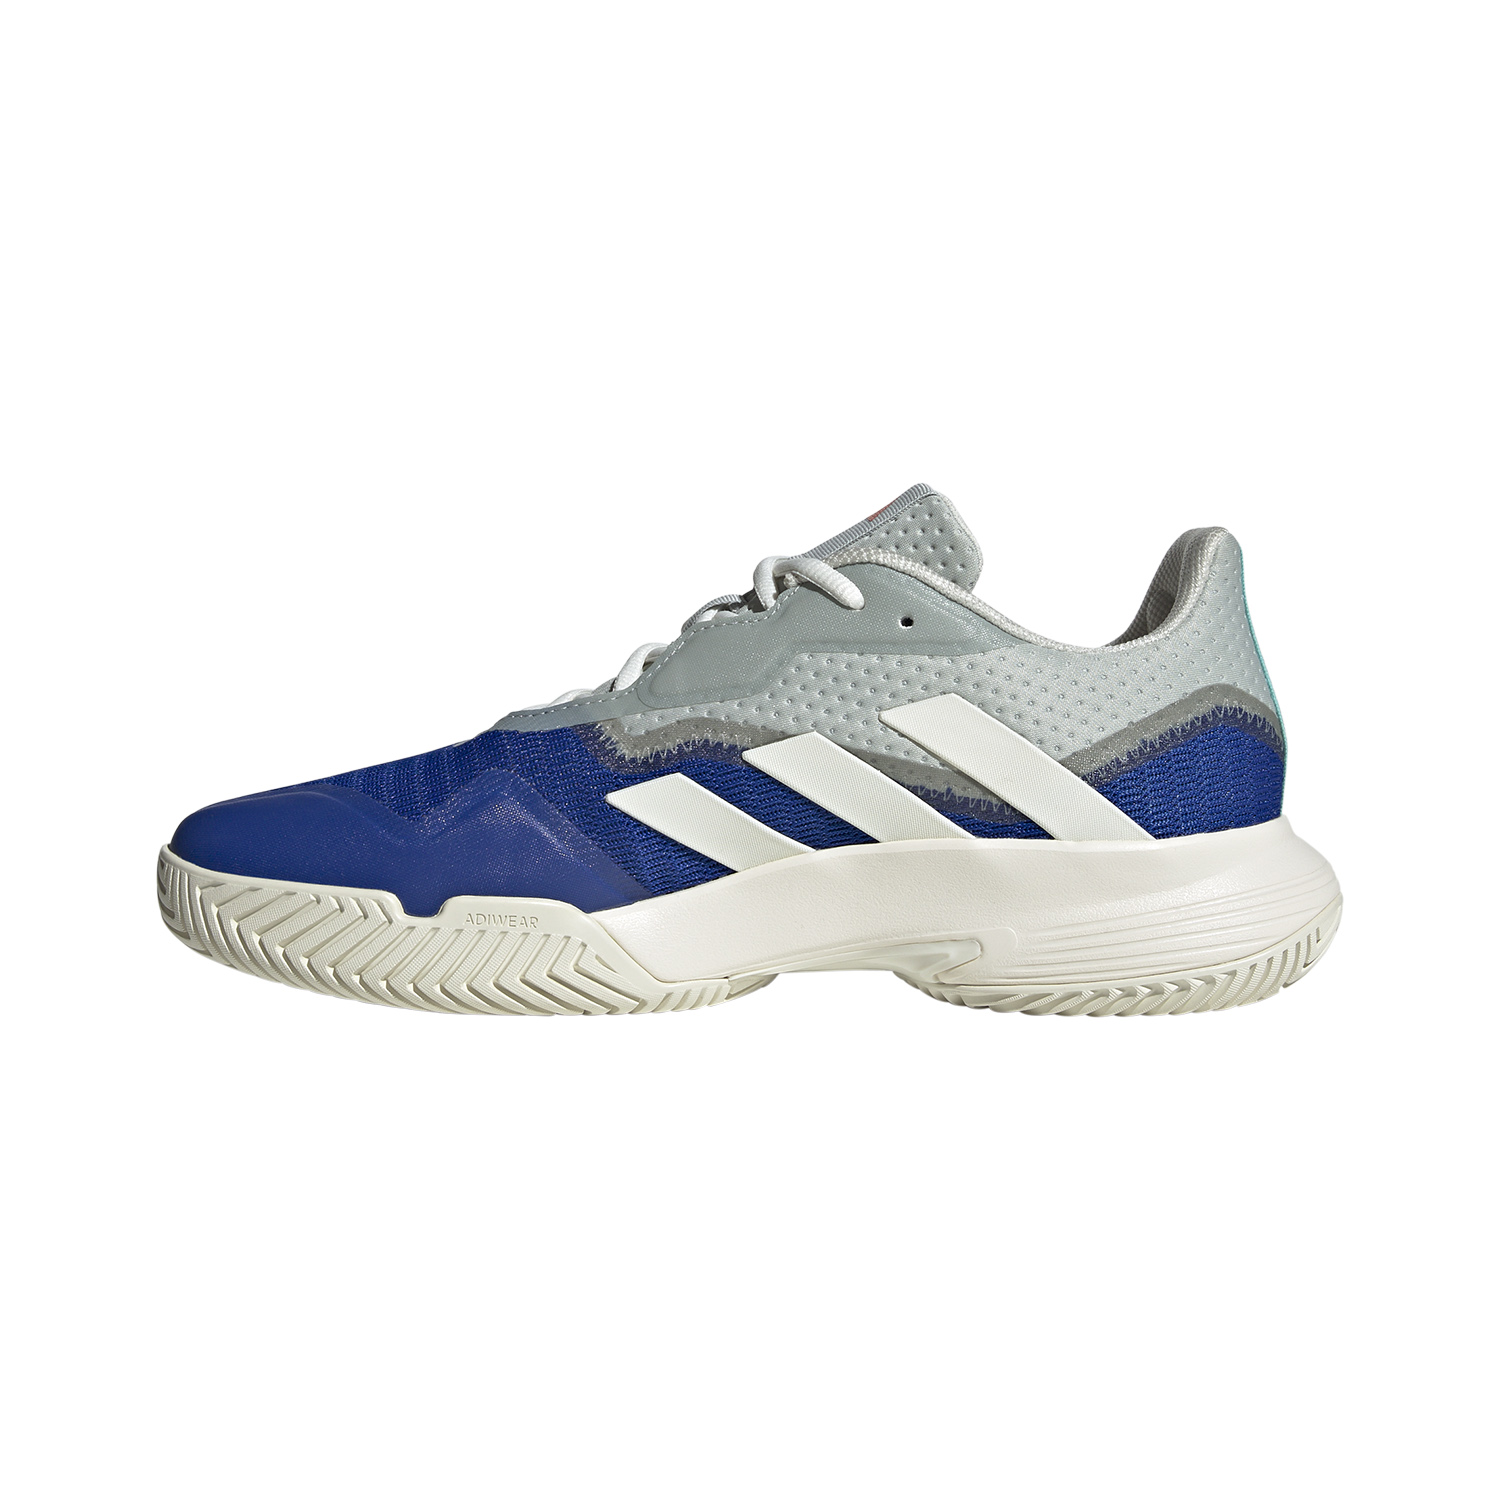 adidas CourtJam Control - Team Royal Blue/Off White/Bright Red